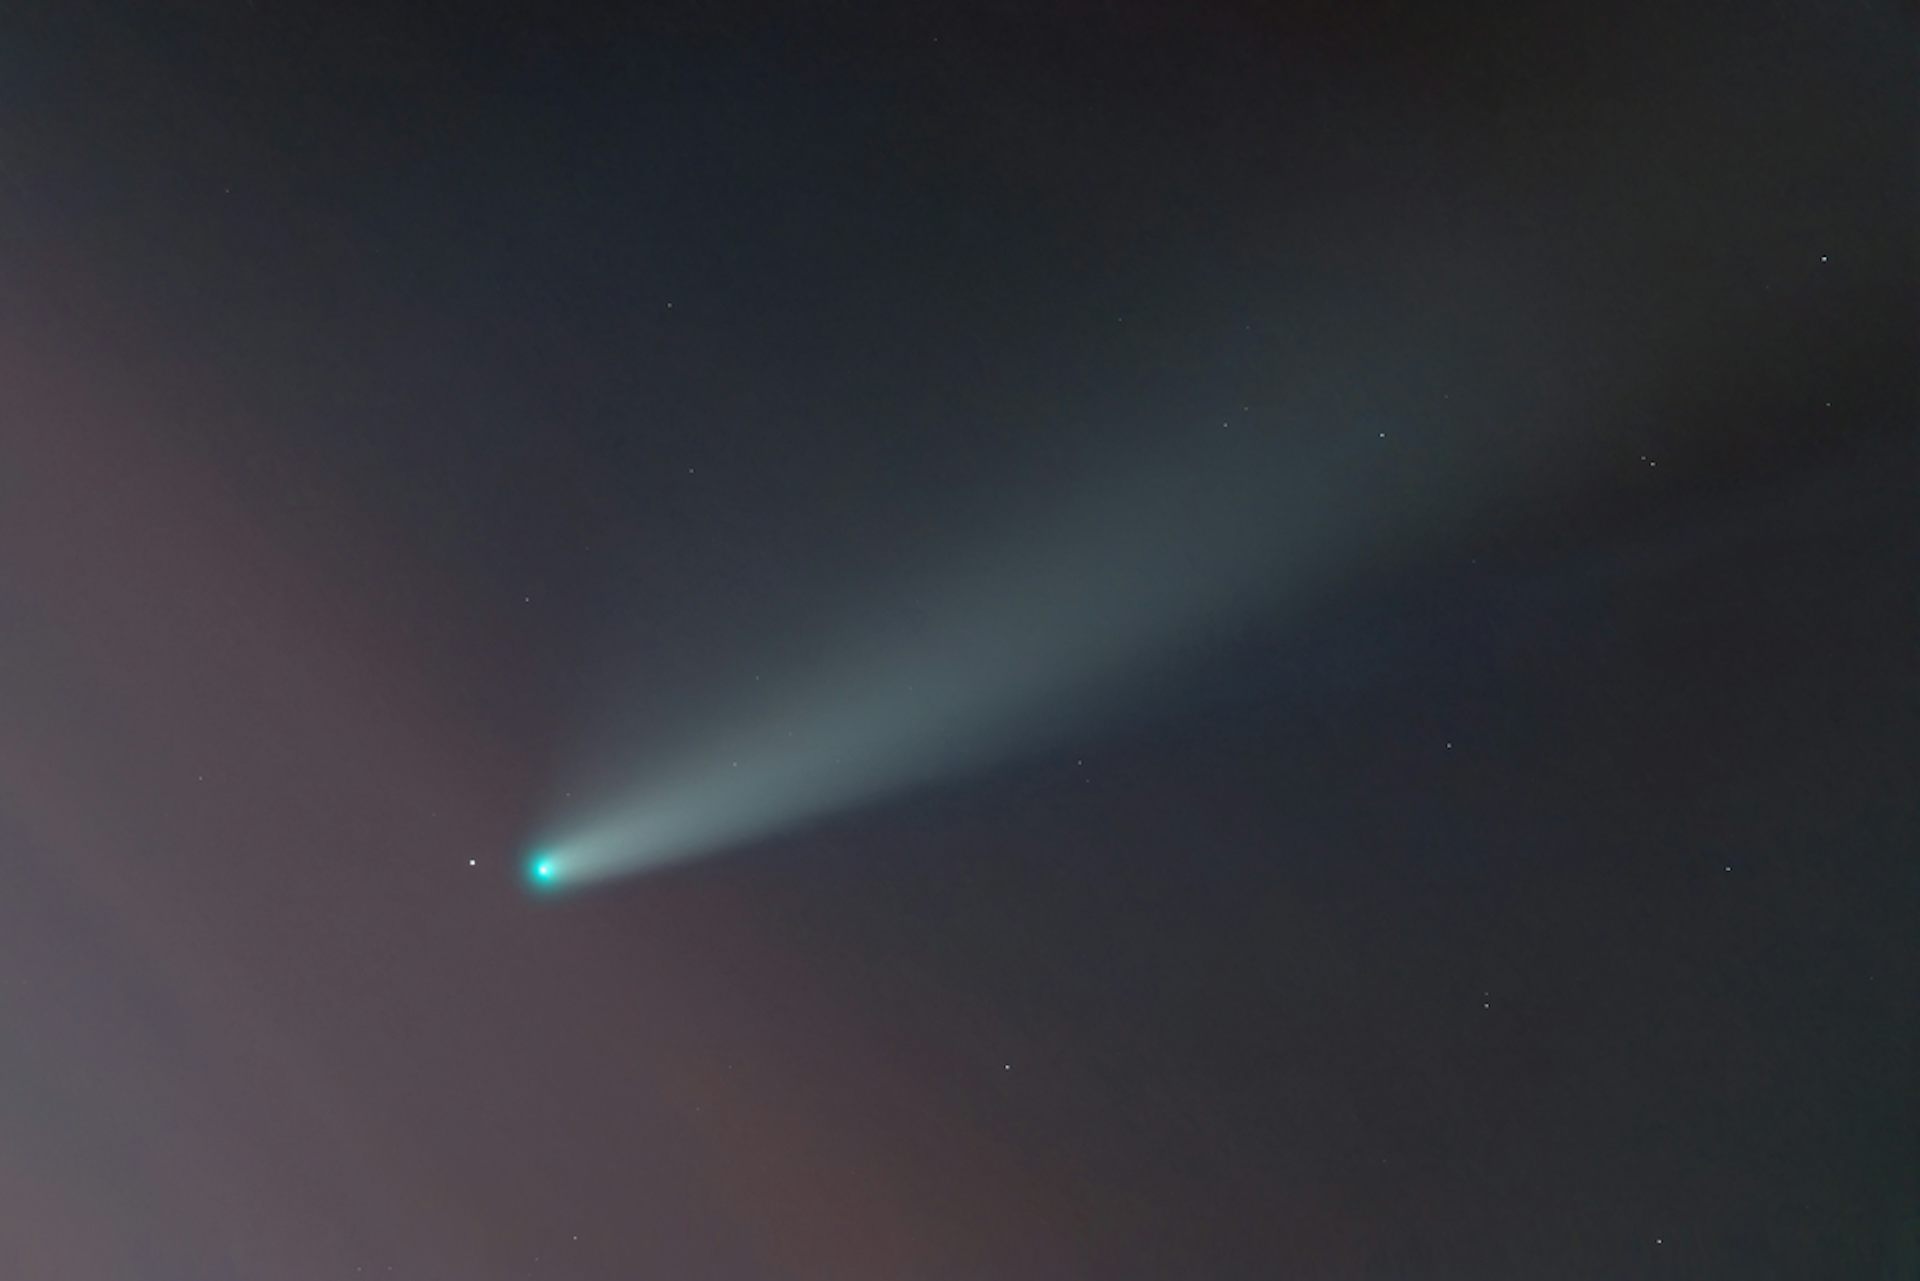 What can we expect now that the 'devil comet' 12P/Pons-Brooks is visible in Australia?